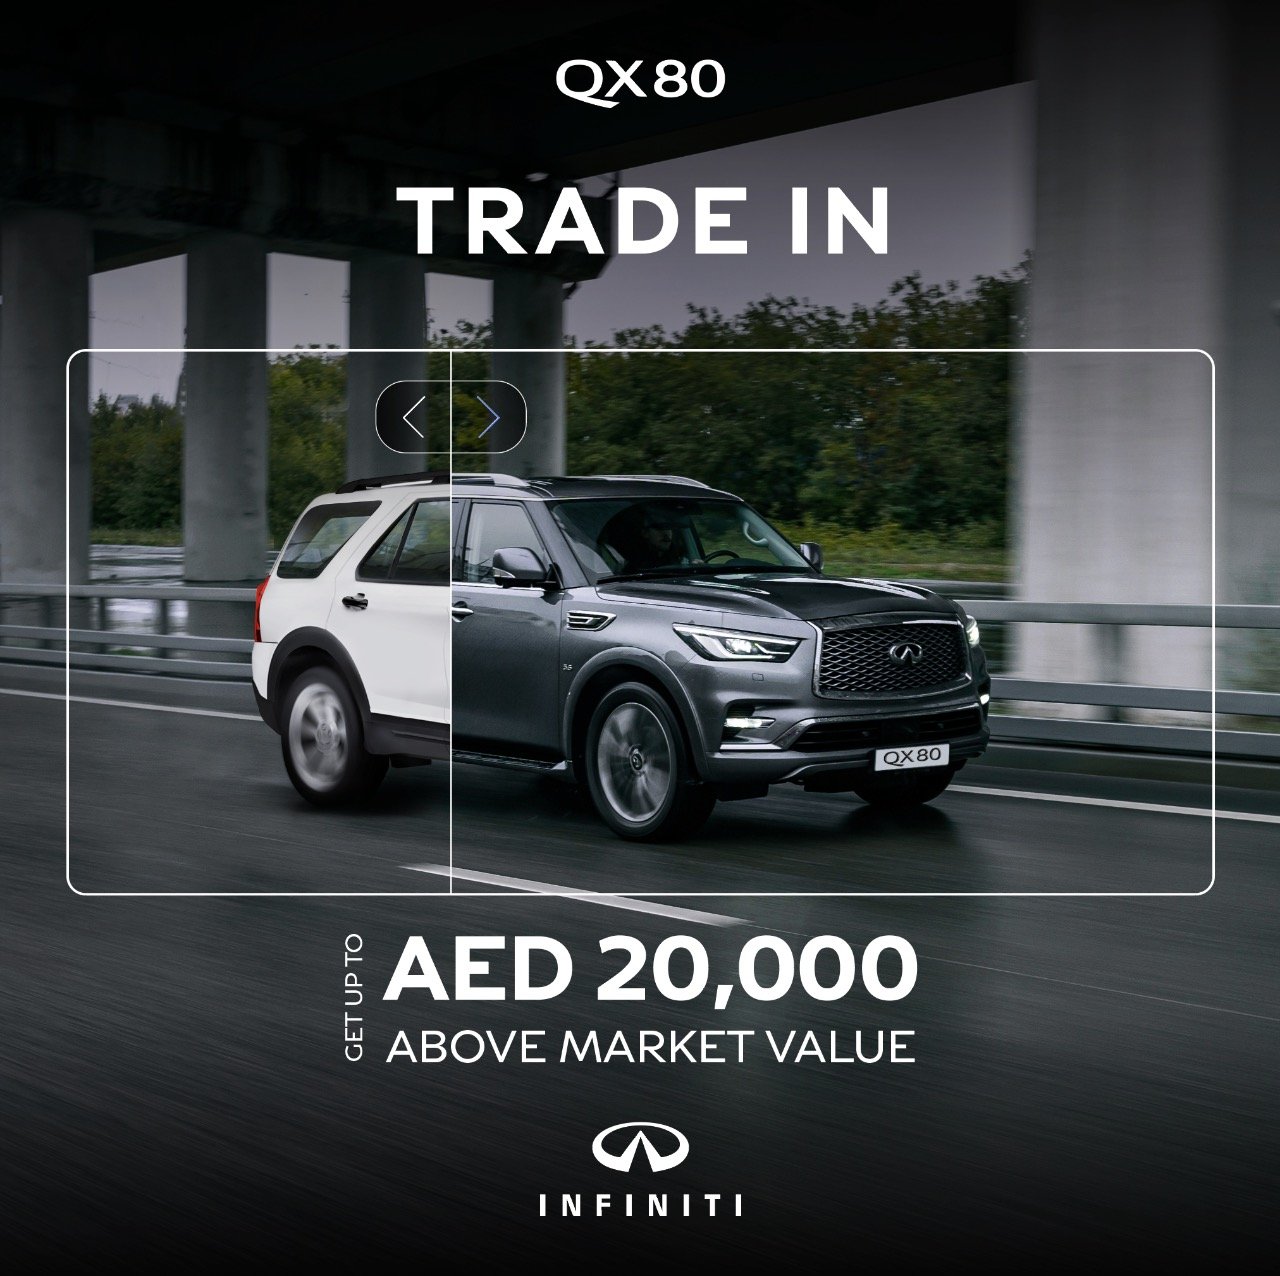 Get up to AED 20,000 above market value with INFINITI’s QX80 TRADE-IN campaign from Arabian Automobiles